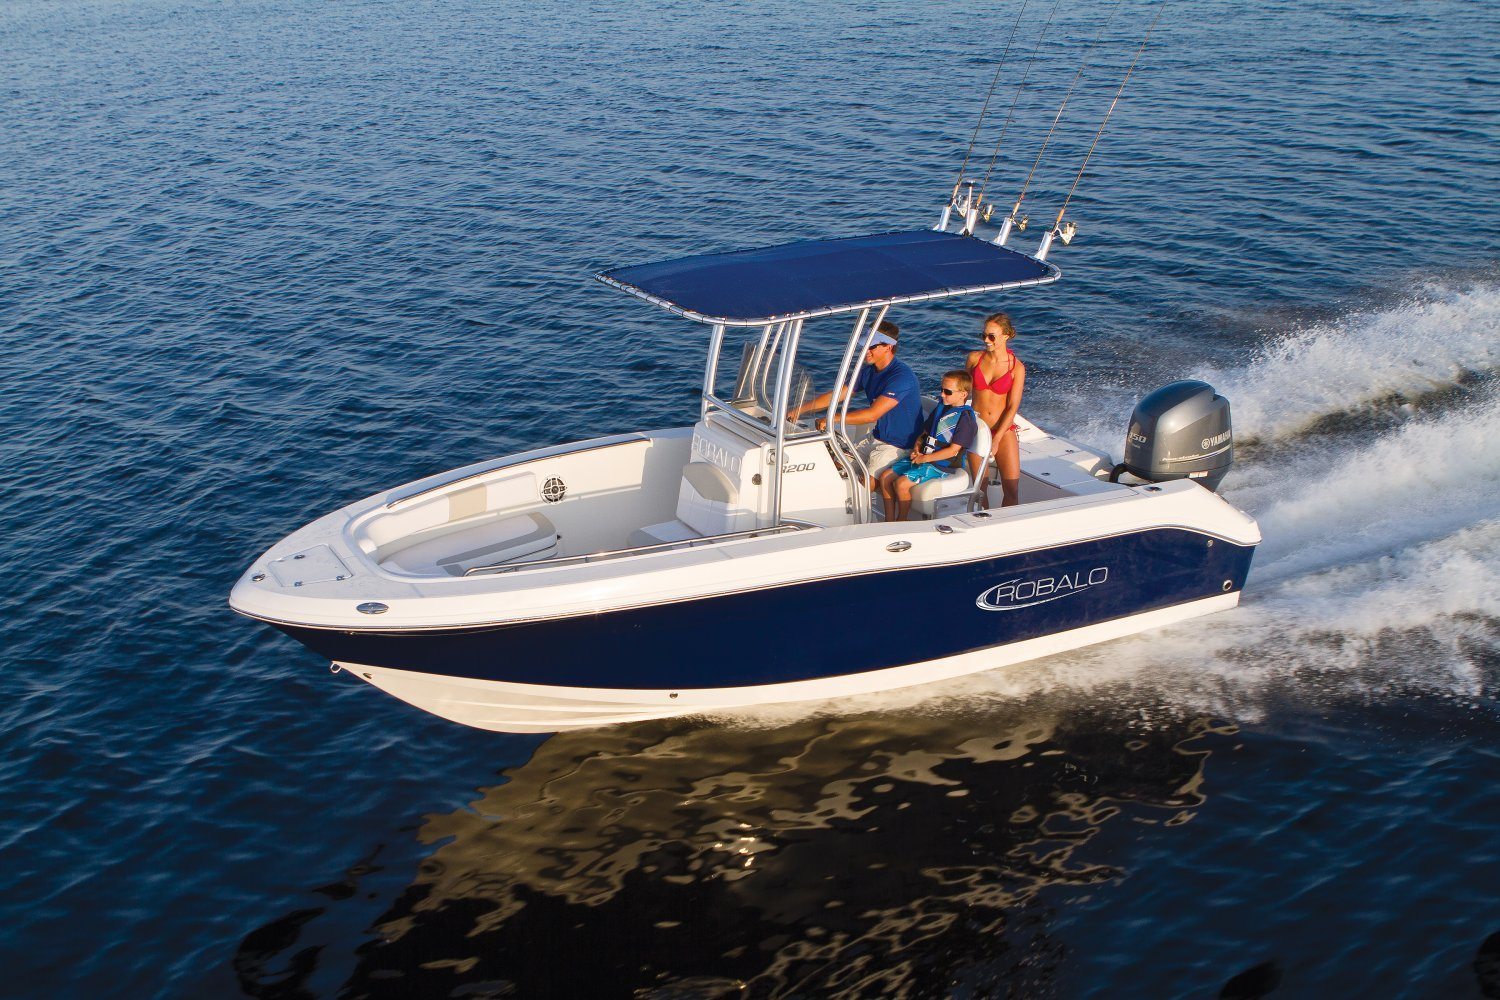 Image FAQ About Robalo Boats and the Robalo R200 a couple and their child on a Robalo R200